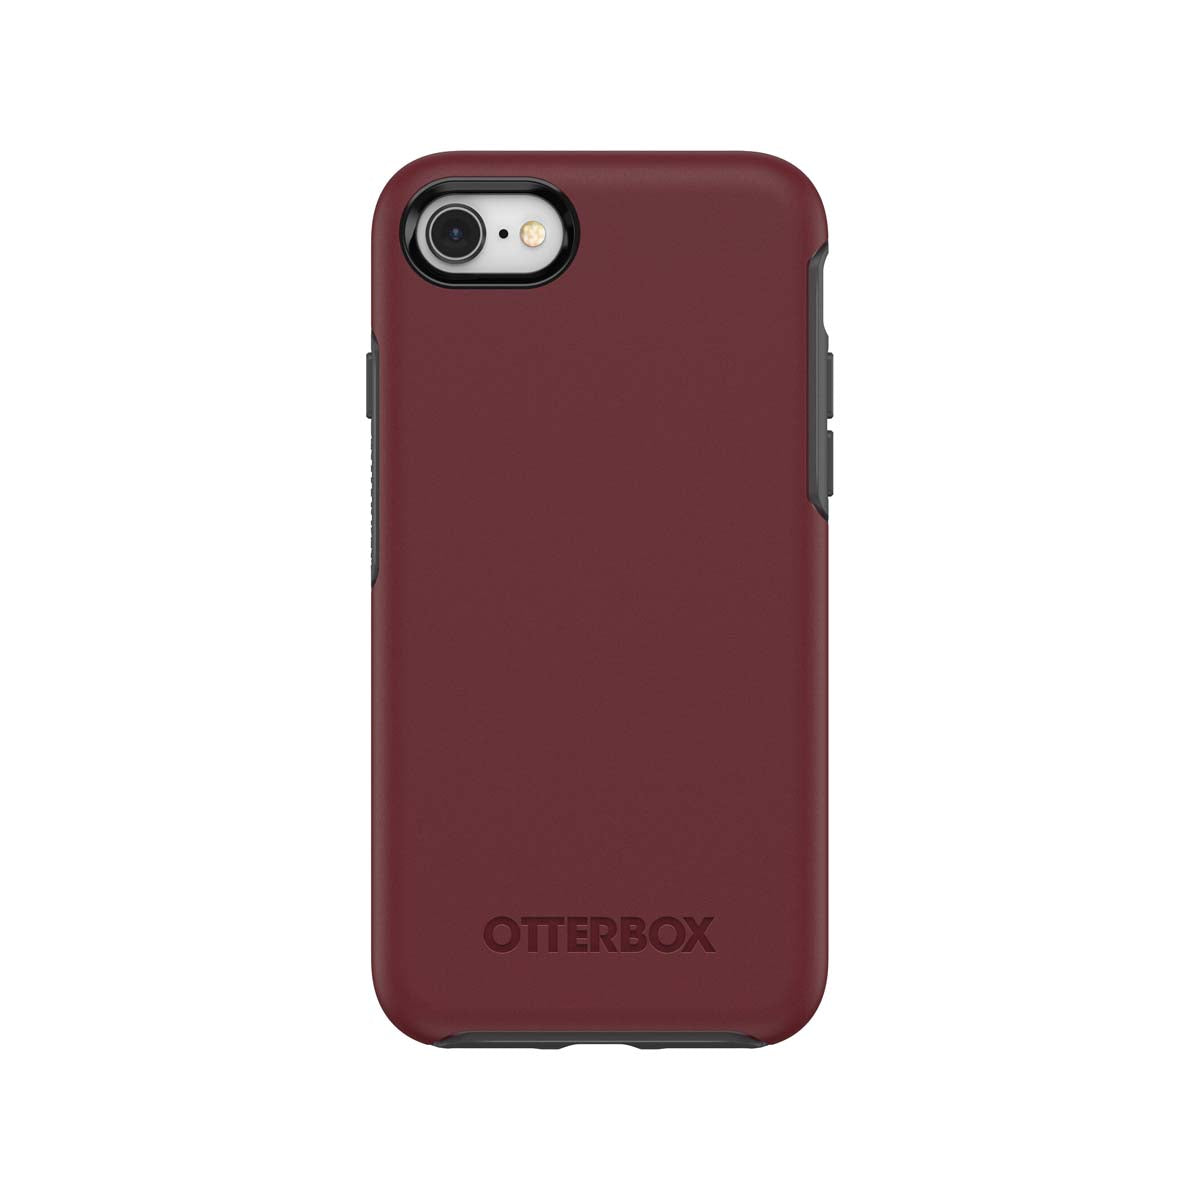 OtterBox Symmetry Phone Case for iPhone 7/8.